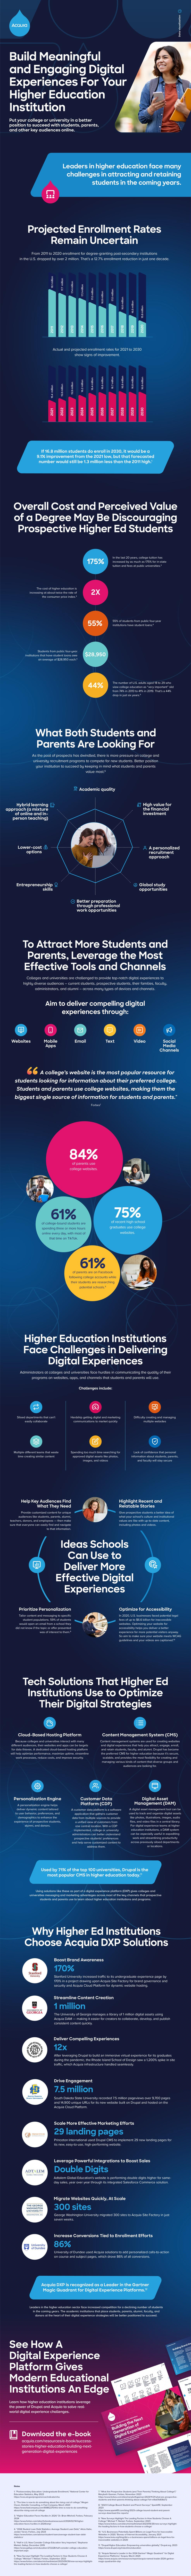 Infographic about the state of higher education digital experiences